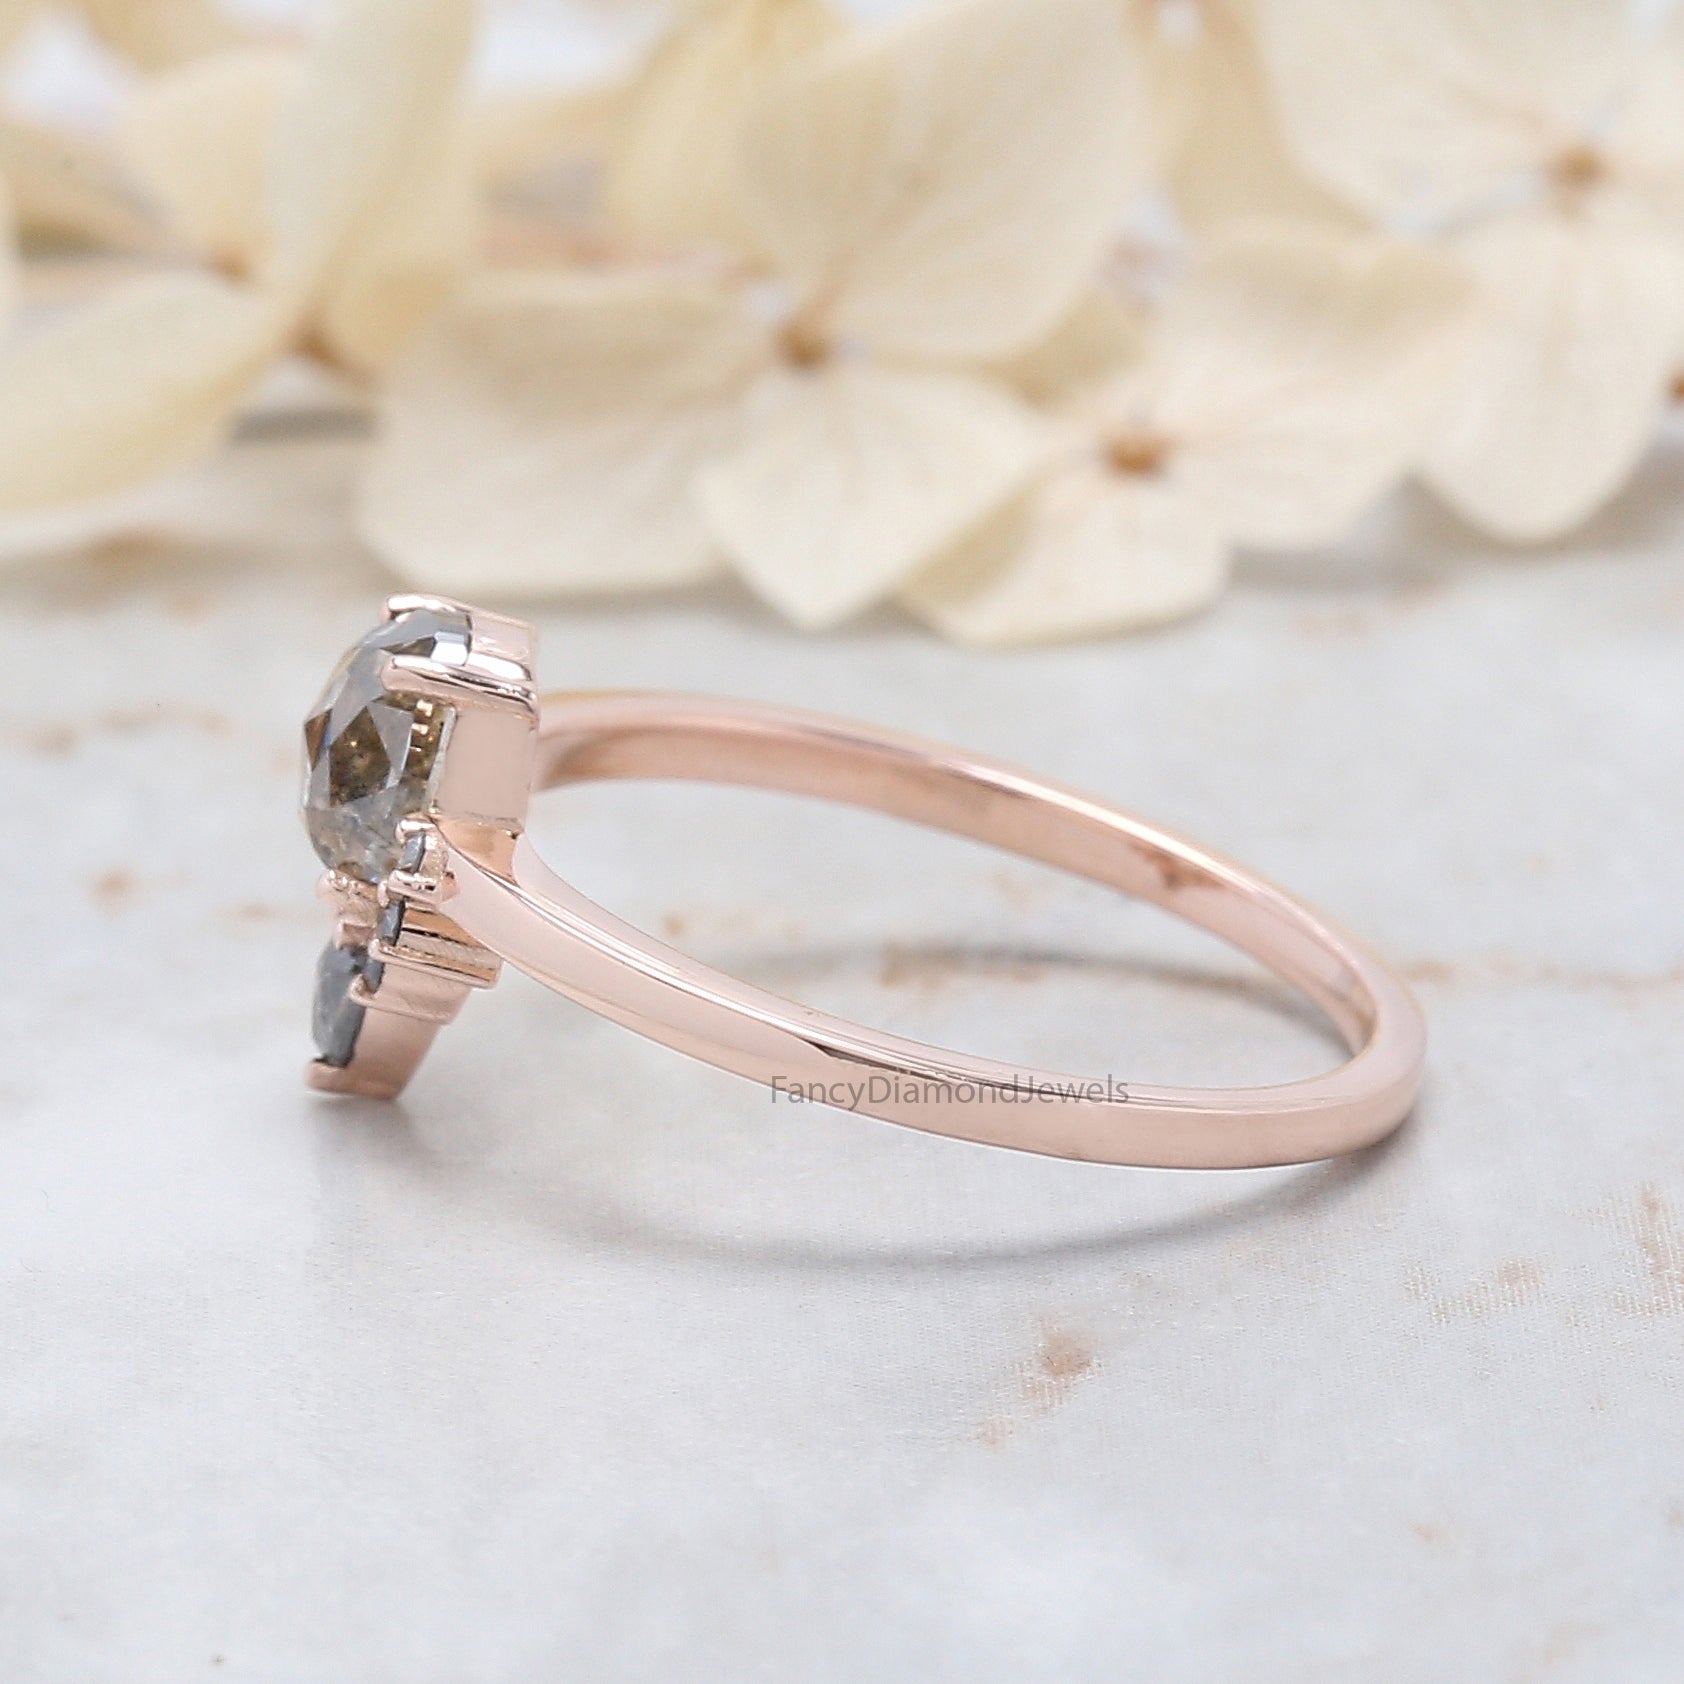 Cushion Cut Salt And Pepper Diamond Ring 0.81 Ct 5.62 MM Cushion Diamond Ring 14K Solid Rose Gold Silver Engagement Ring Gift For Her QL9308